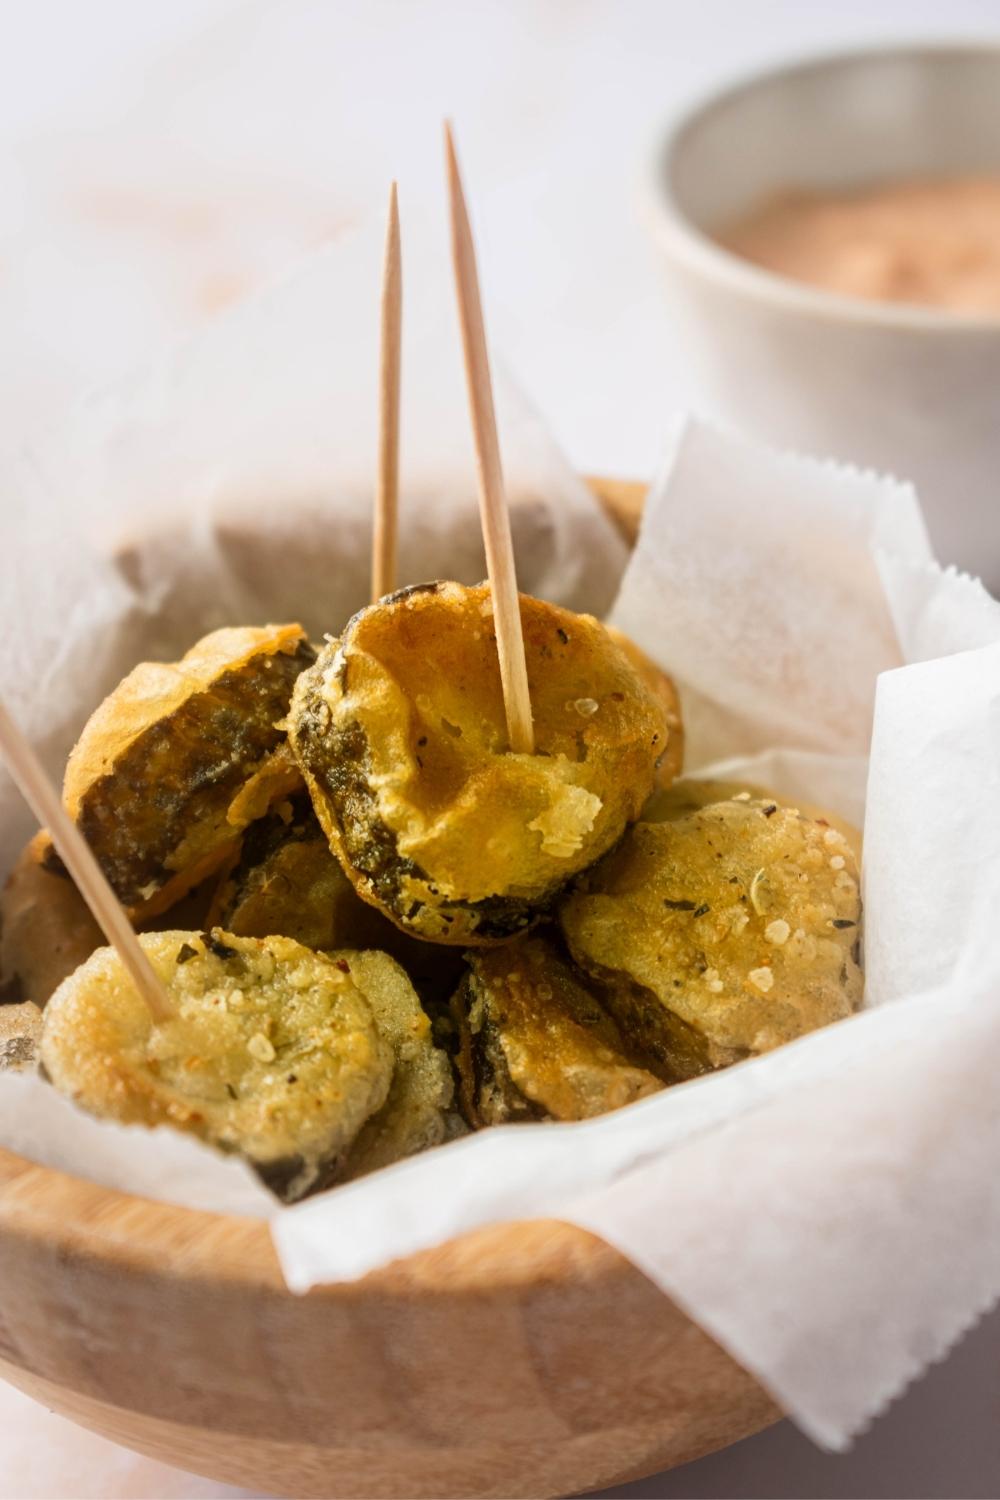 Fried pickle slices on parchment paper in a wooden bowl. The front to pickle slices have a toothpick in the center of them.